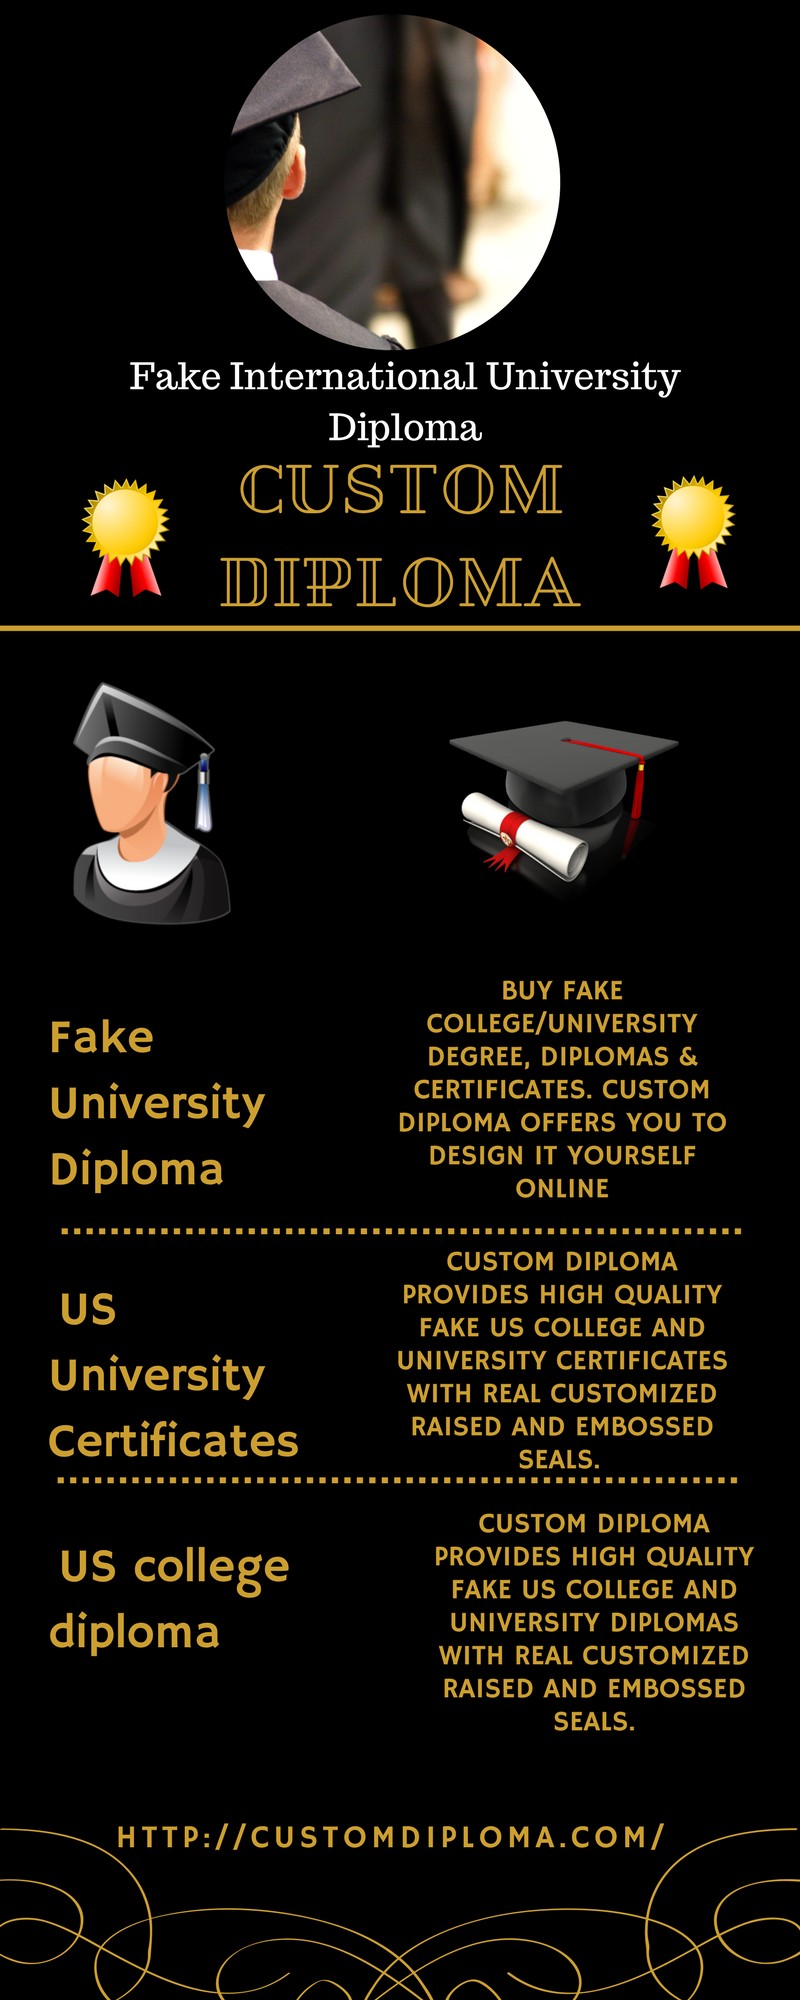 Custom Diploma Helps You To Create Your Own Fake International Design Certificate Online Free